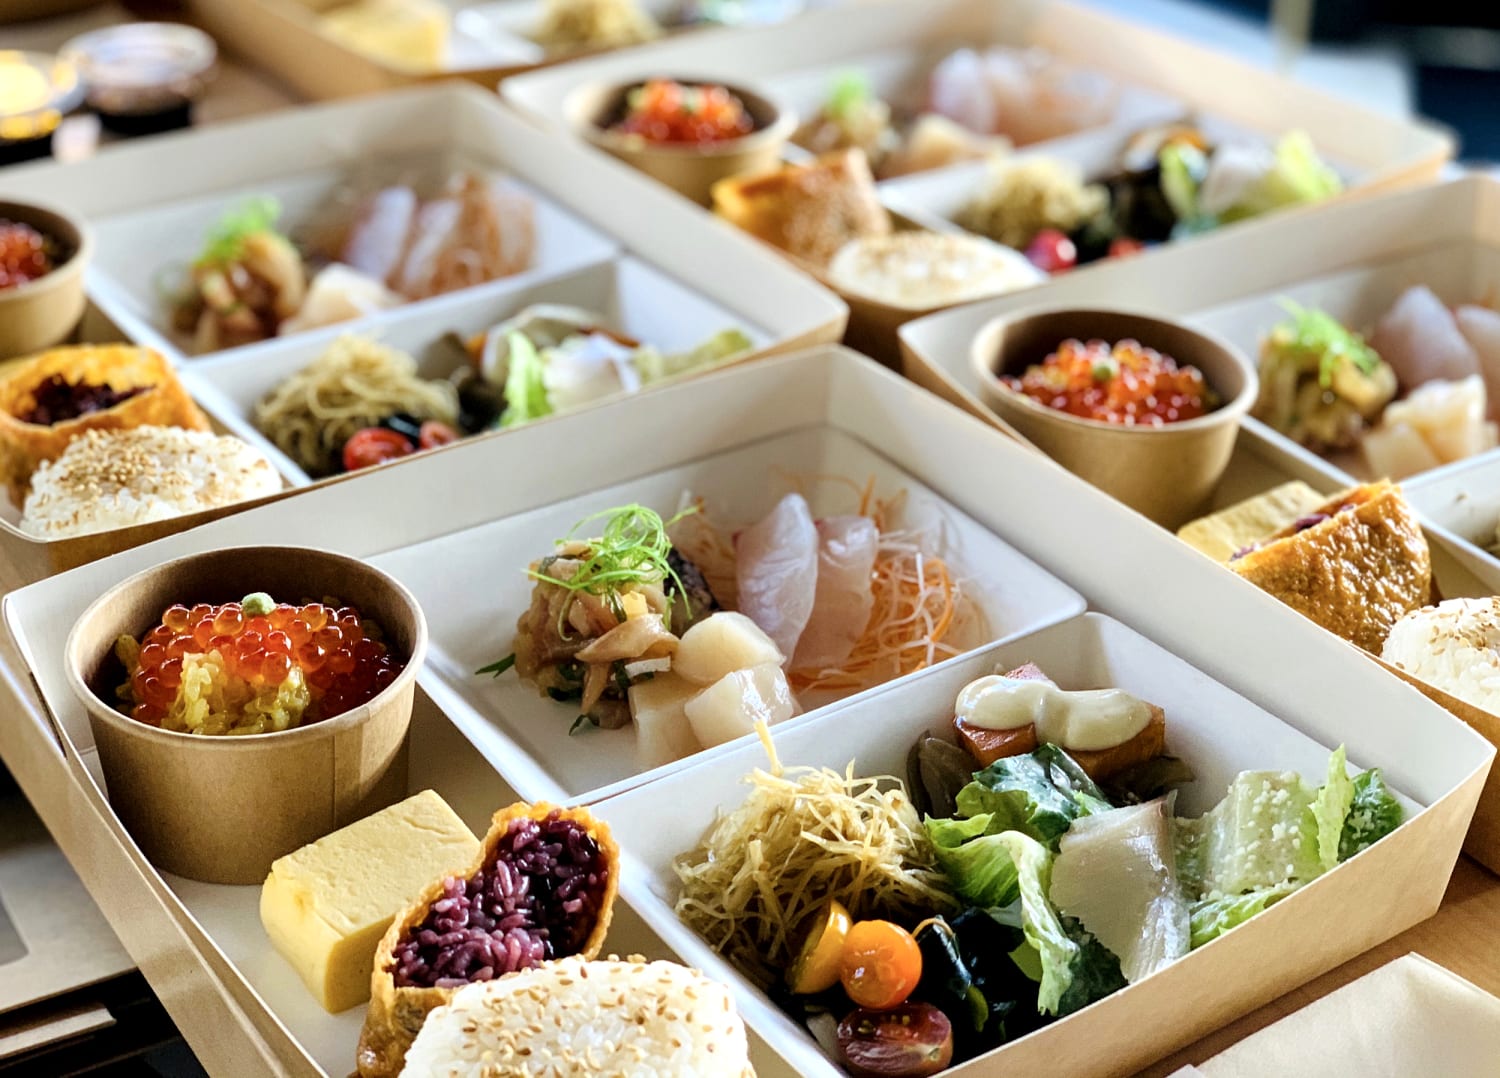 The Rise of Disposable Bento Boxes: Convenience & Sustainability - MIDA